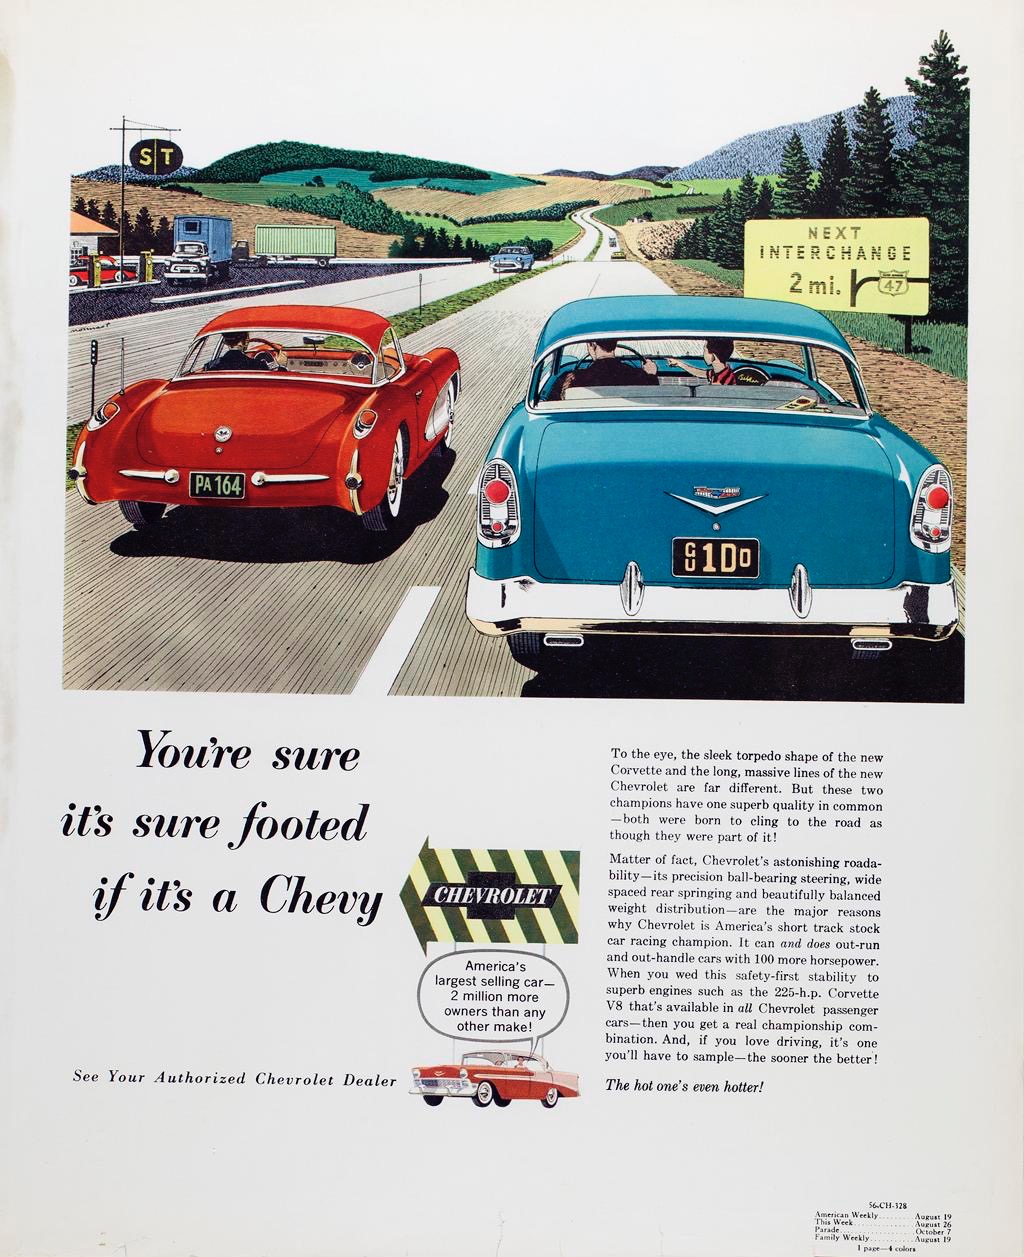 , We go hunting for the first time Chevrolet was called Chevy, ClassicCars.com Journal